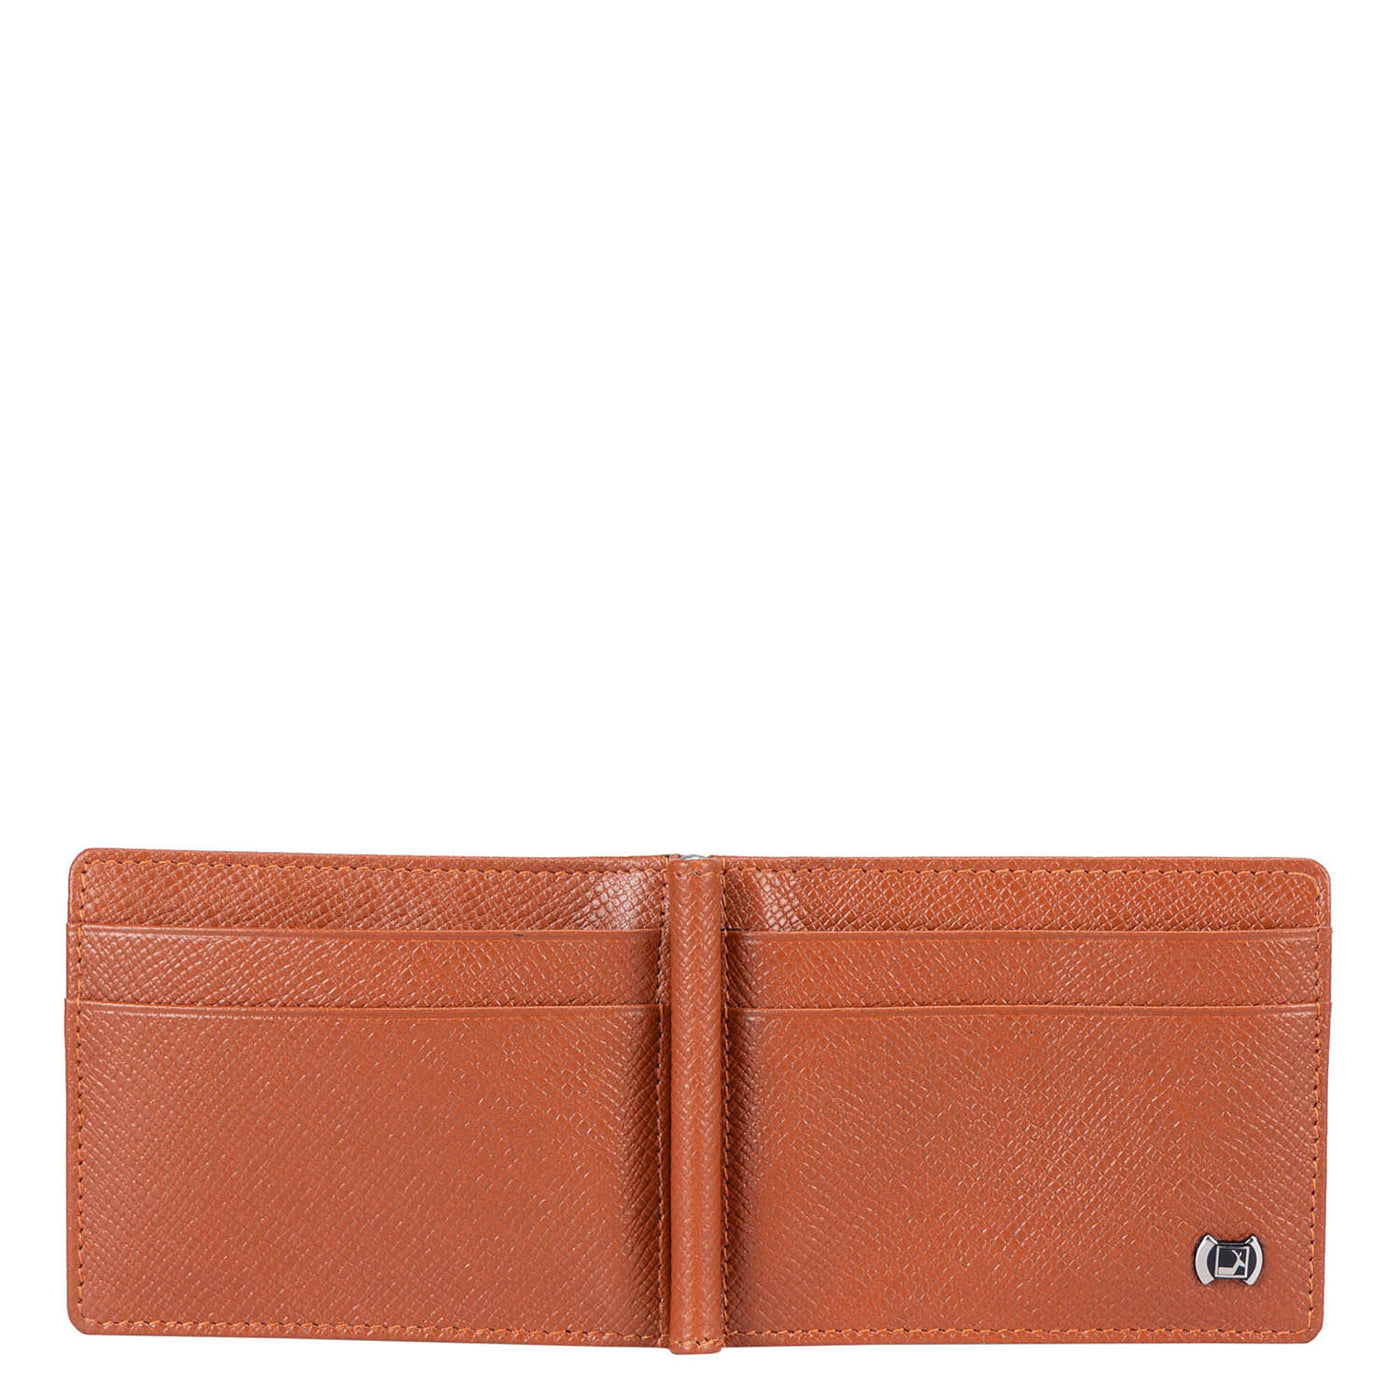 Franzy Leather Money Clip - Rust